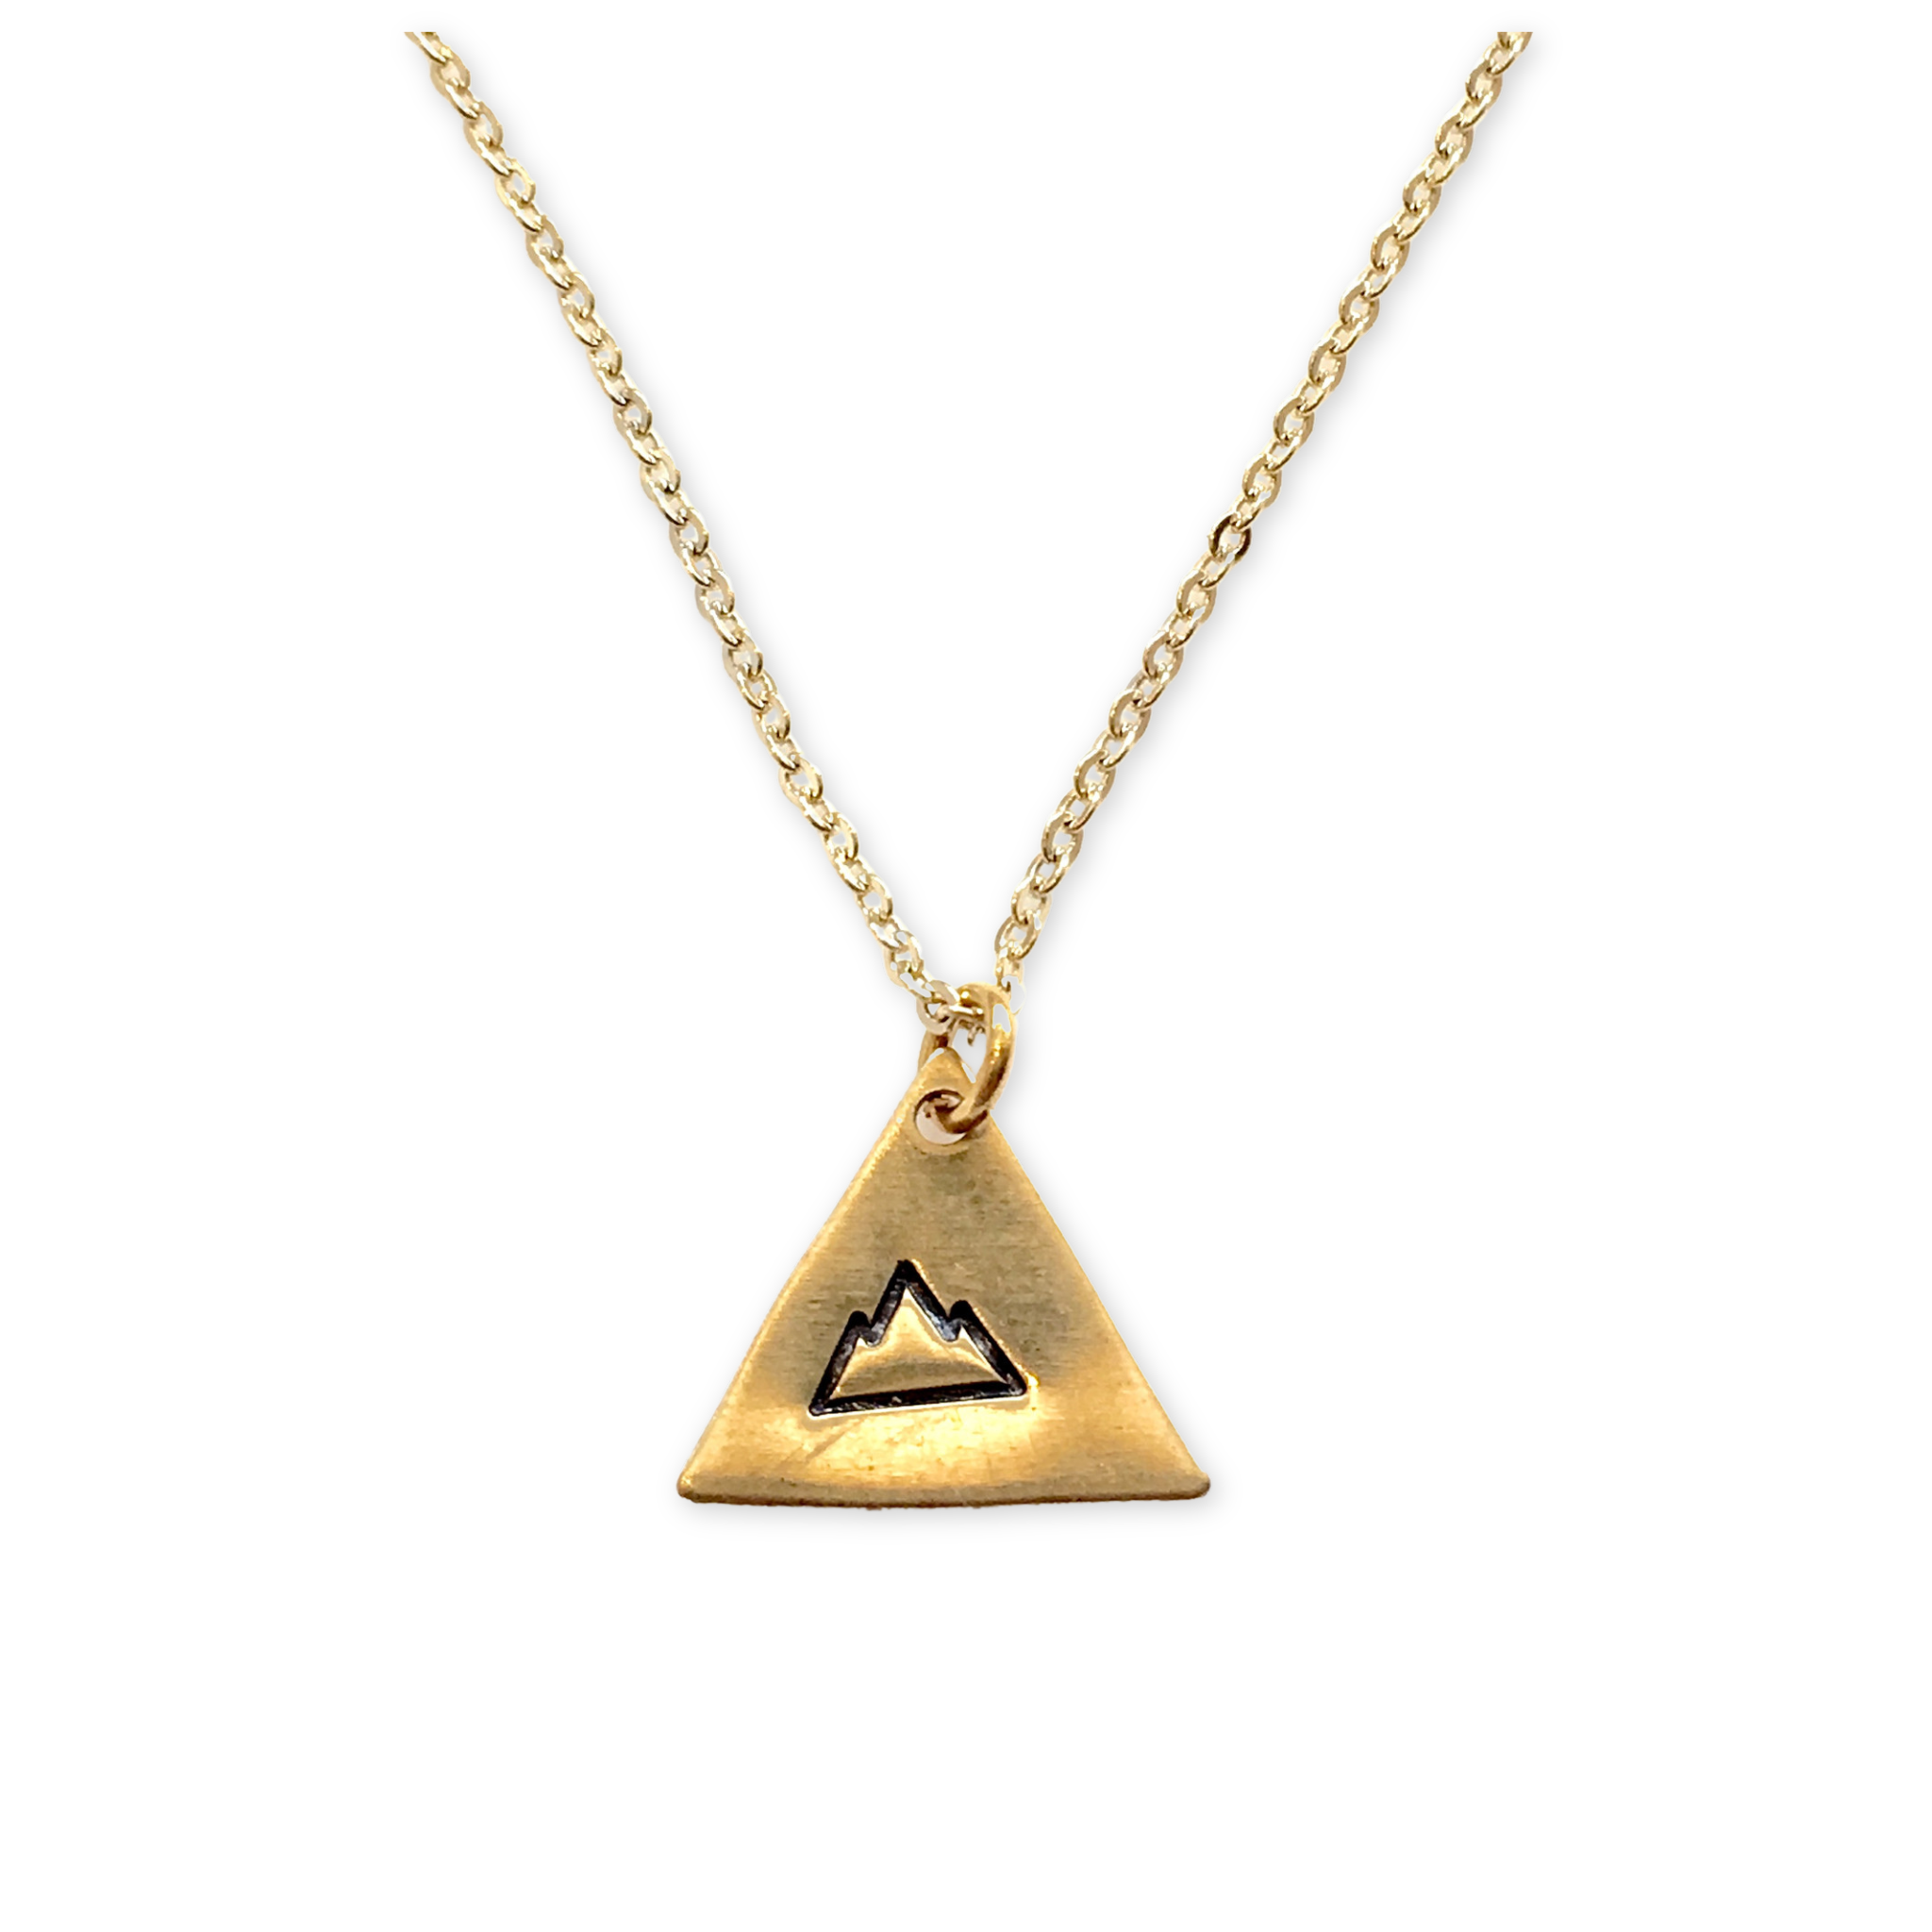 gold necklace with triangle pendant and a stamped mountain design